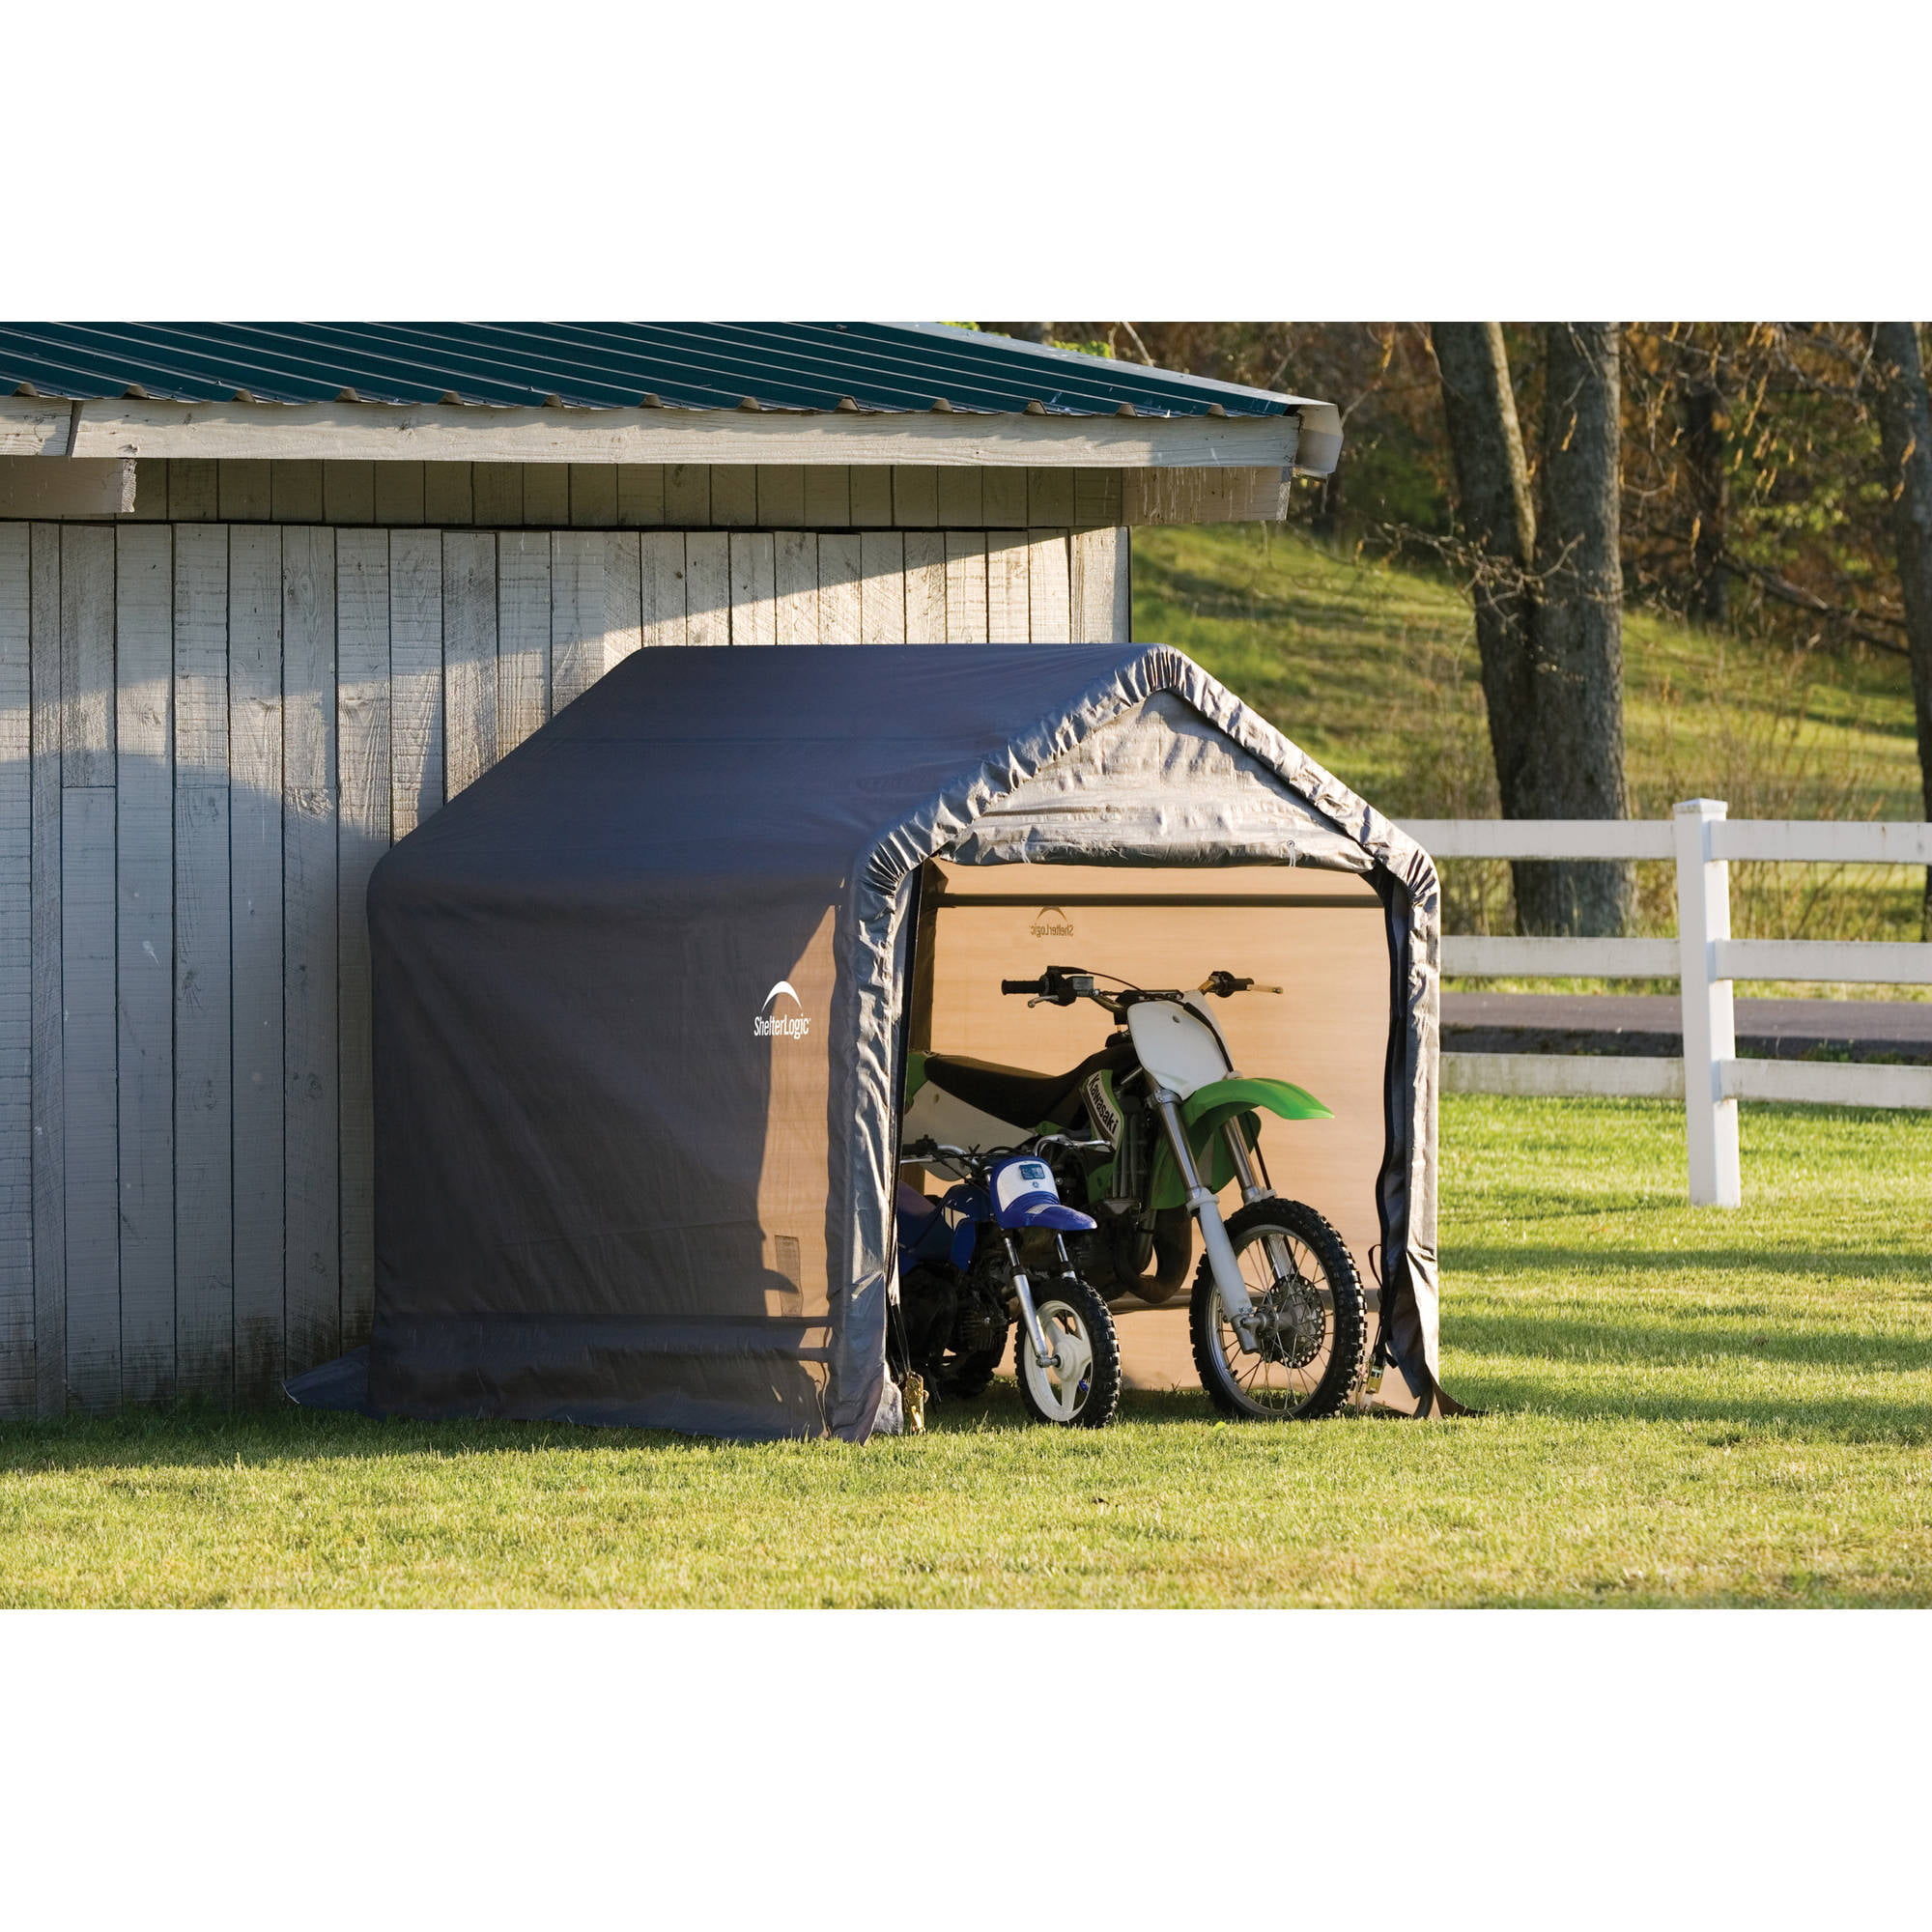 Riding Lawn Mower Storage Shed Outdoor Garden Portable 